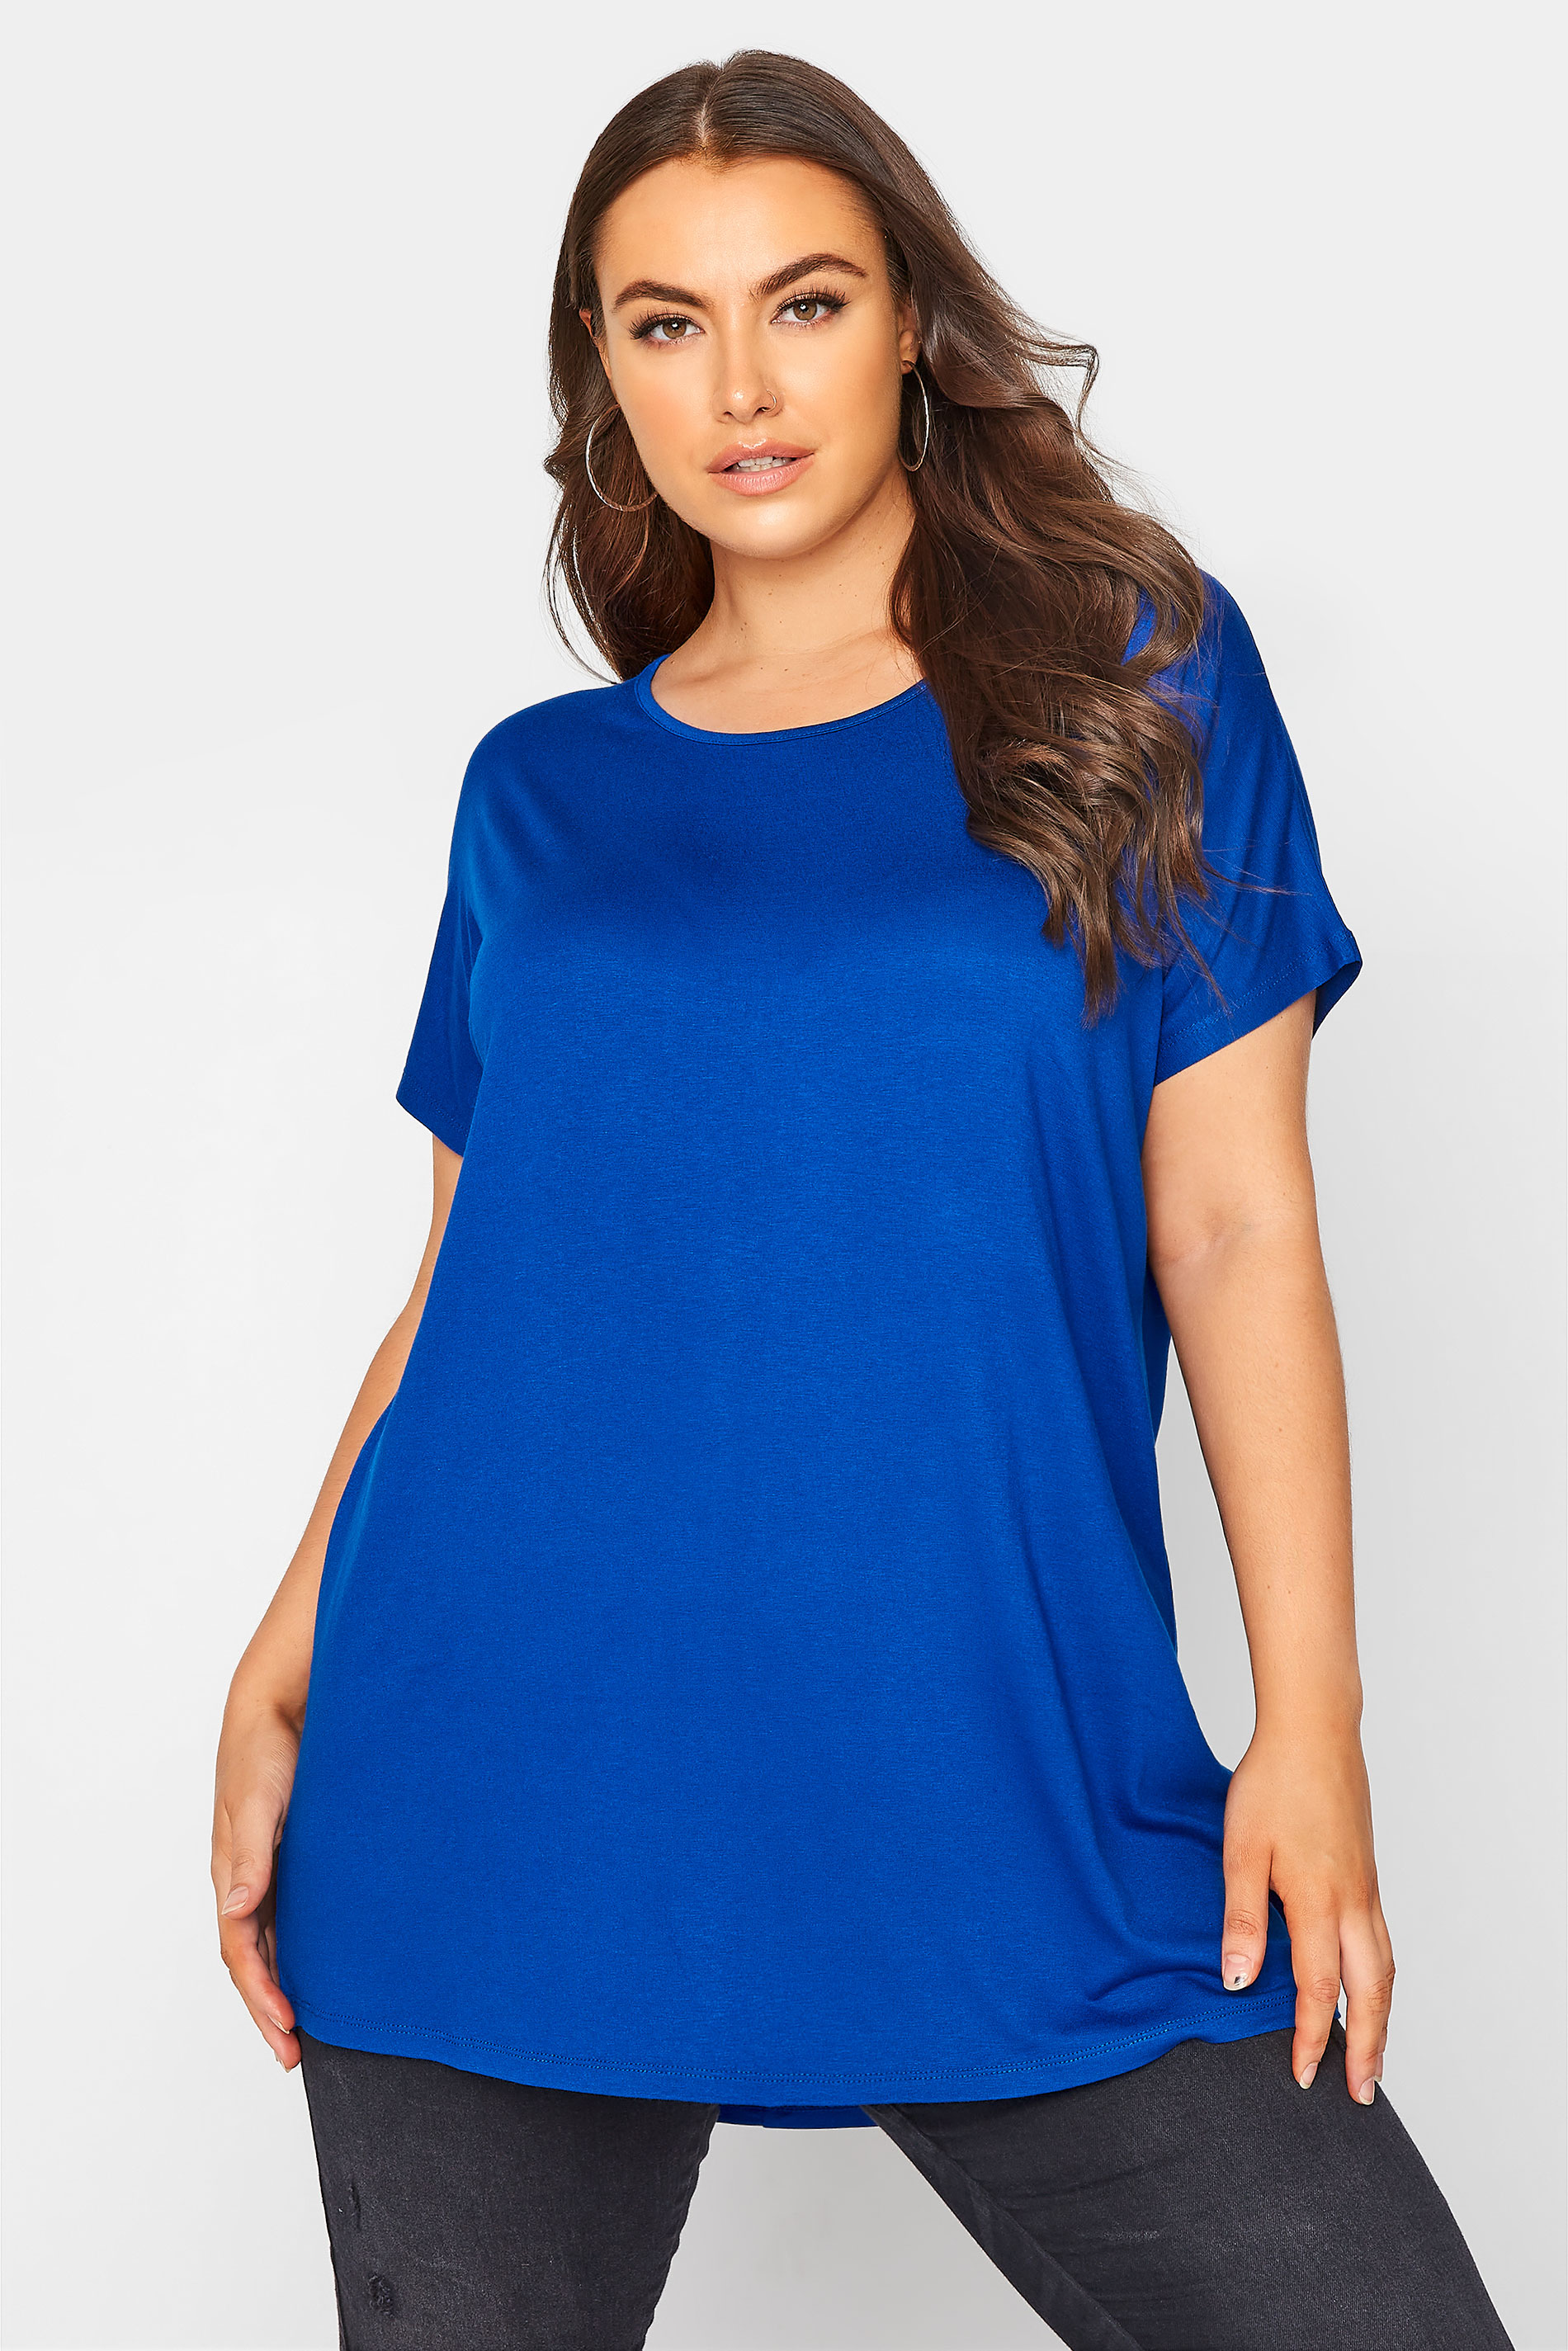 Grande taille  Tops Grande taille  T-Shirts | T-Shirt Bleu Roi Ourlet Plongeant - IV94634